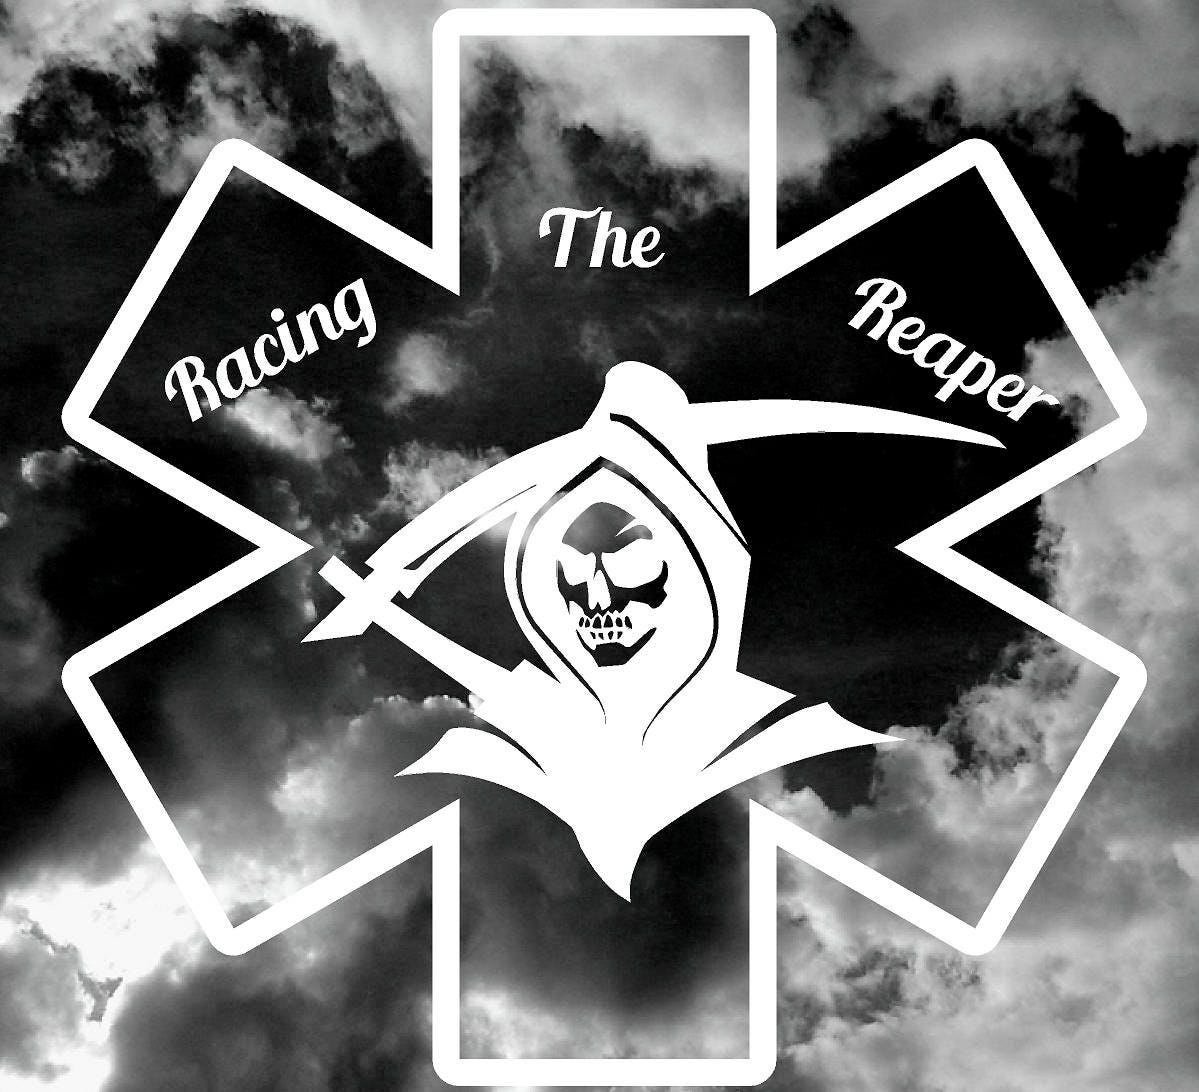  We Race the Reaper EMT Vinyl Sticker Decal by KLO Graphics :  Automotive